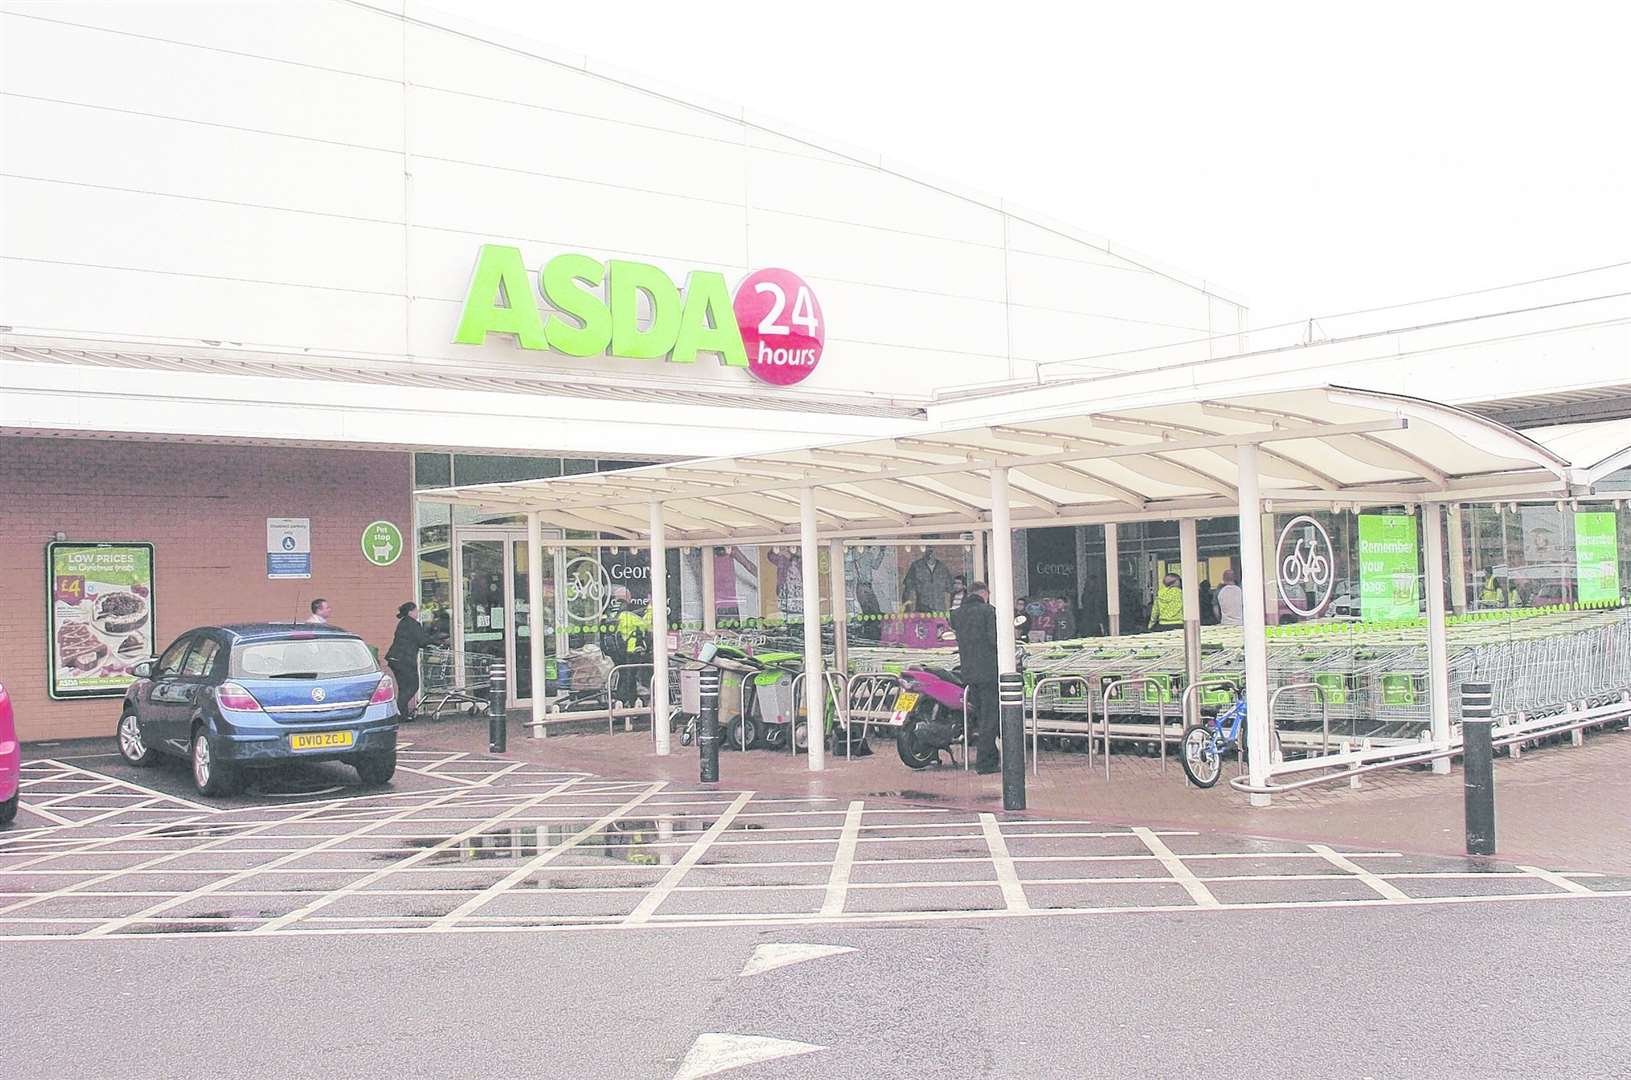 Adsa in Greenhithe